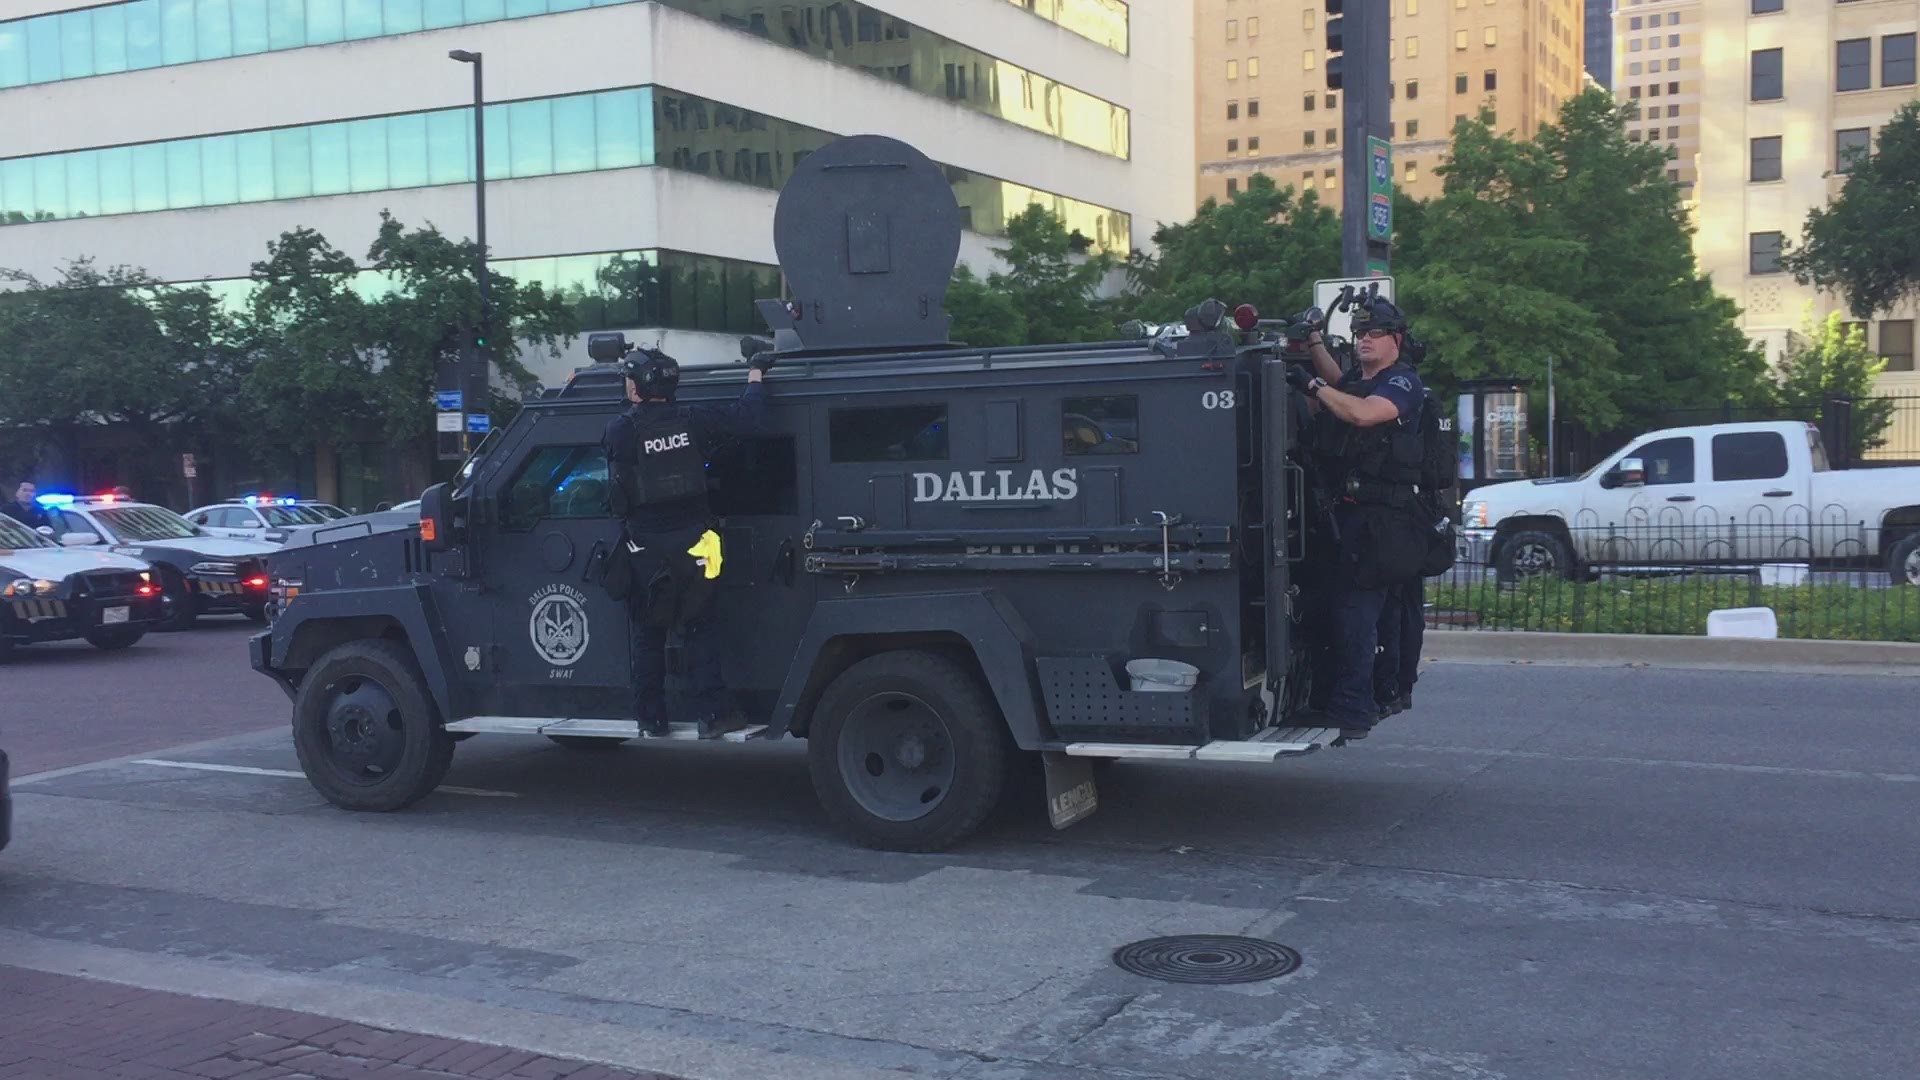 A tactical vehicle was seen responding to the protests in downtown Dallas on Saturday.